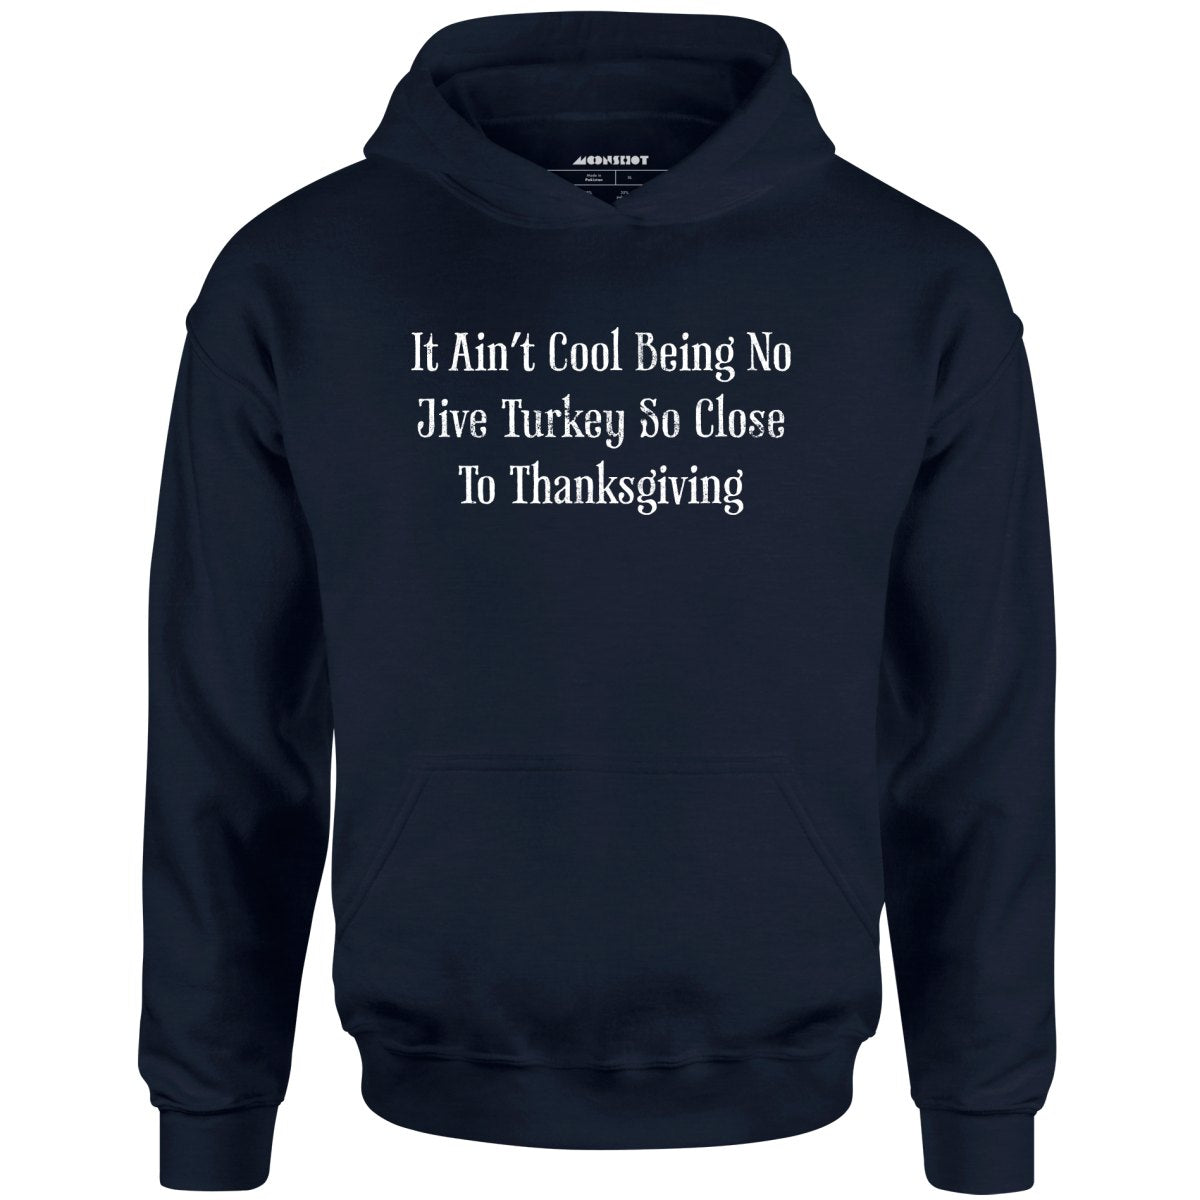 It Ain't Cool Being No Jive Turkey So Close to Thanksgiving - Unisex Hoodie